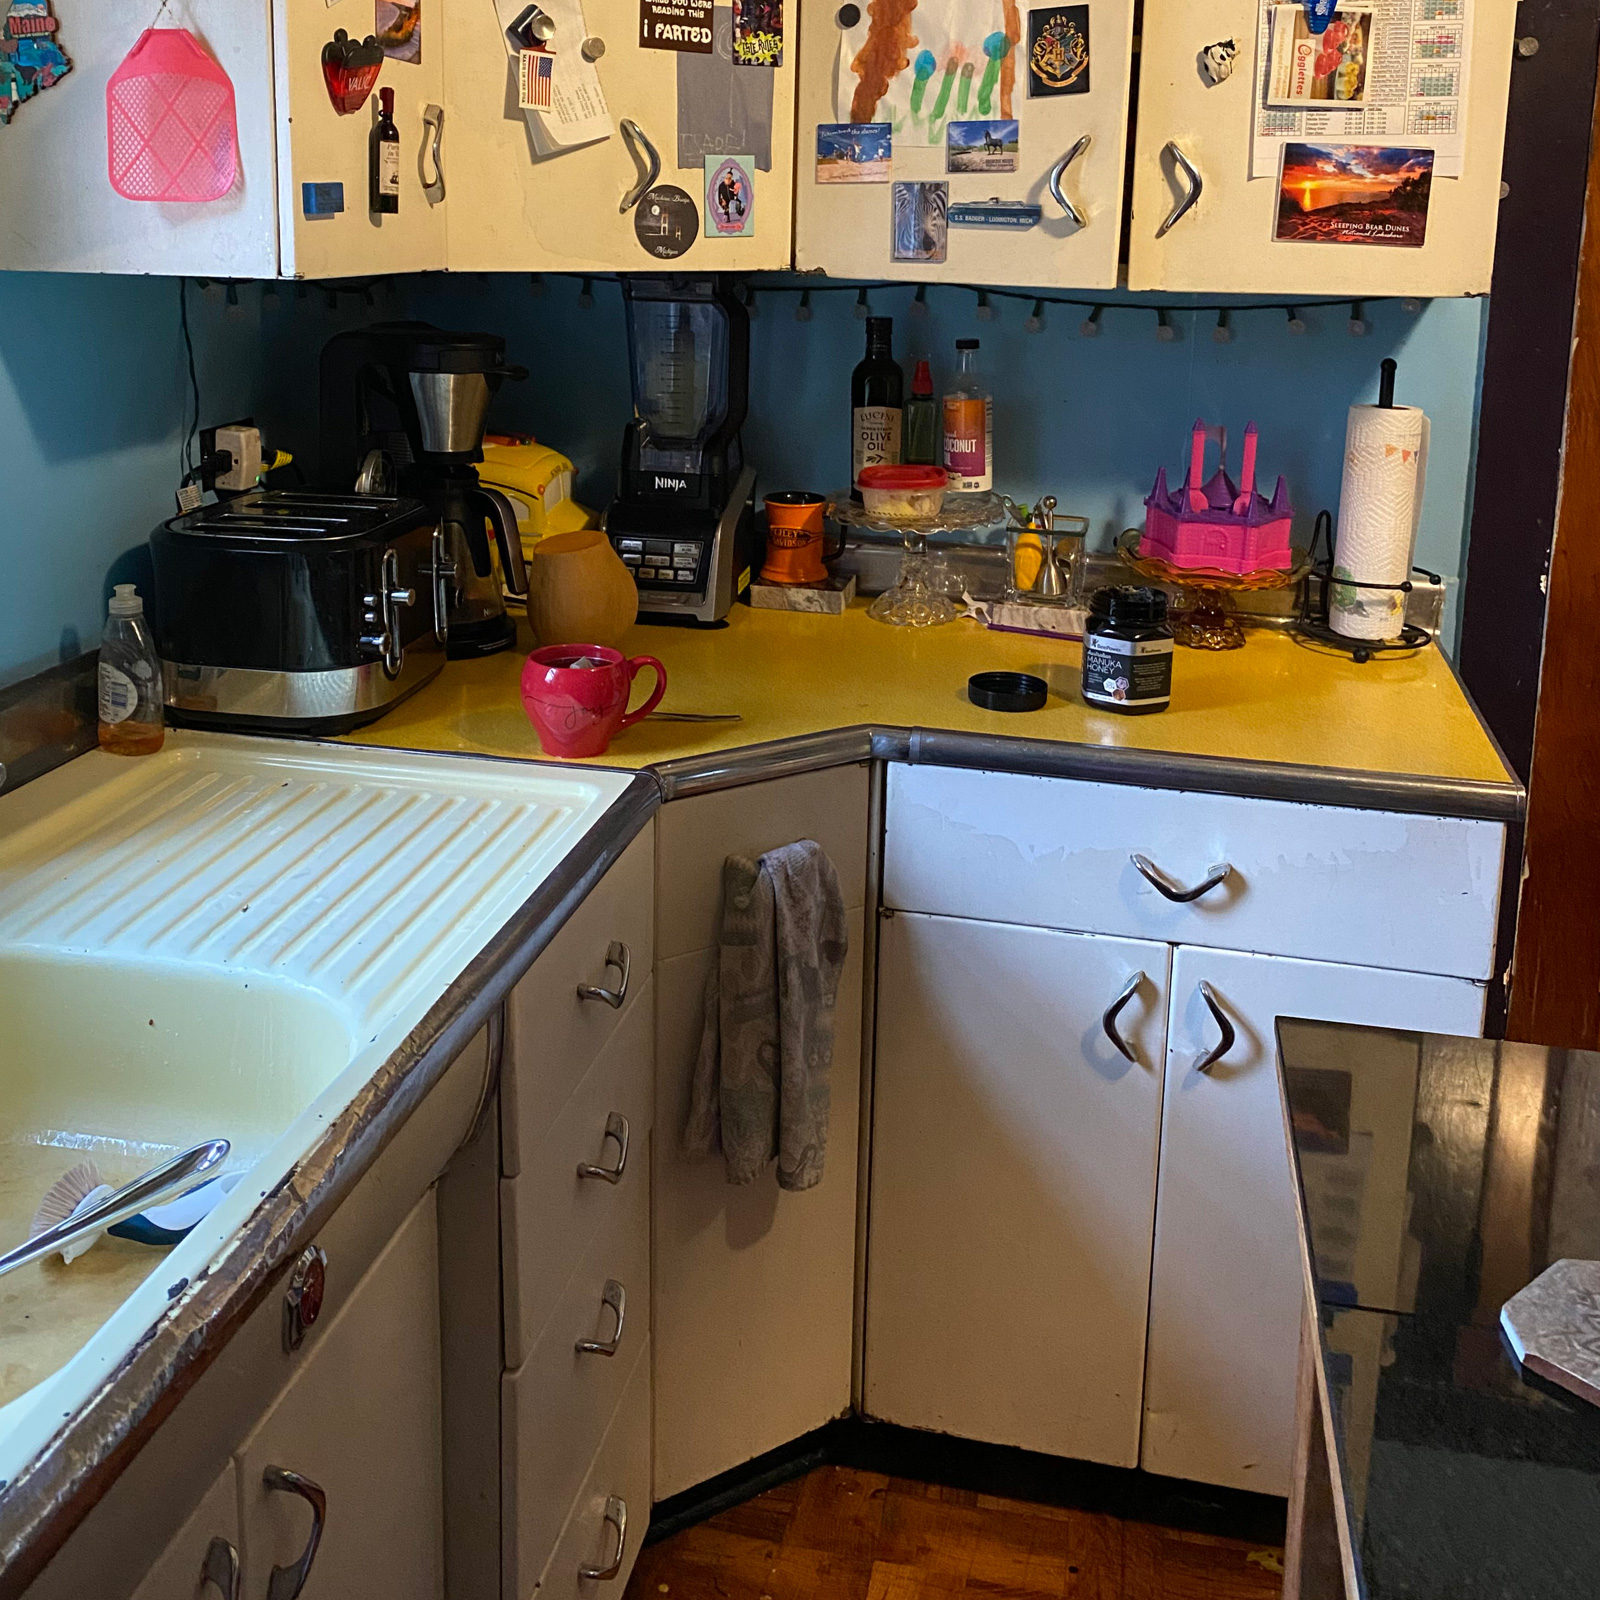 Entry 178 - It's time to renovate this very dated kitchen